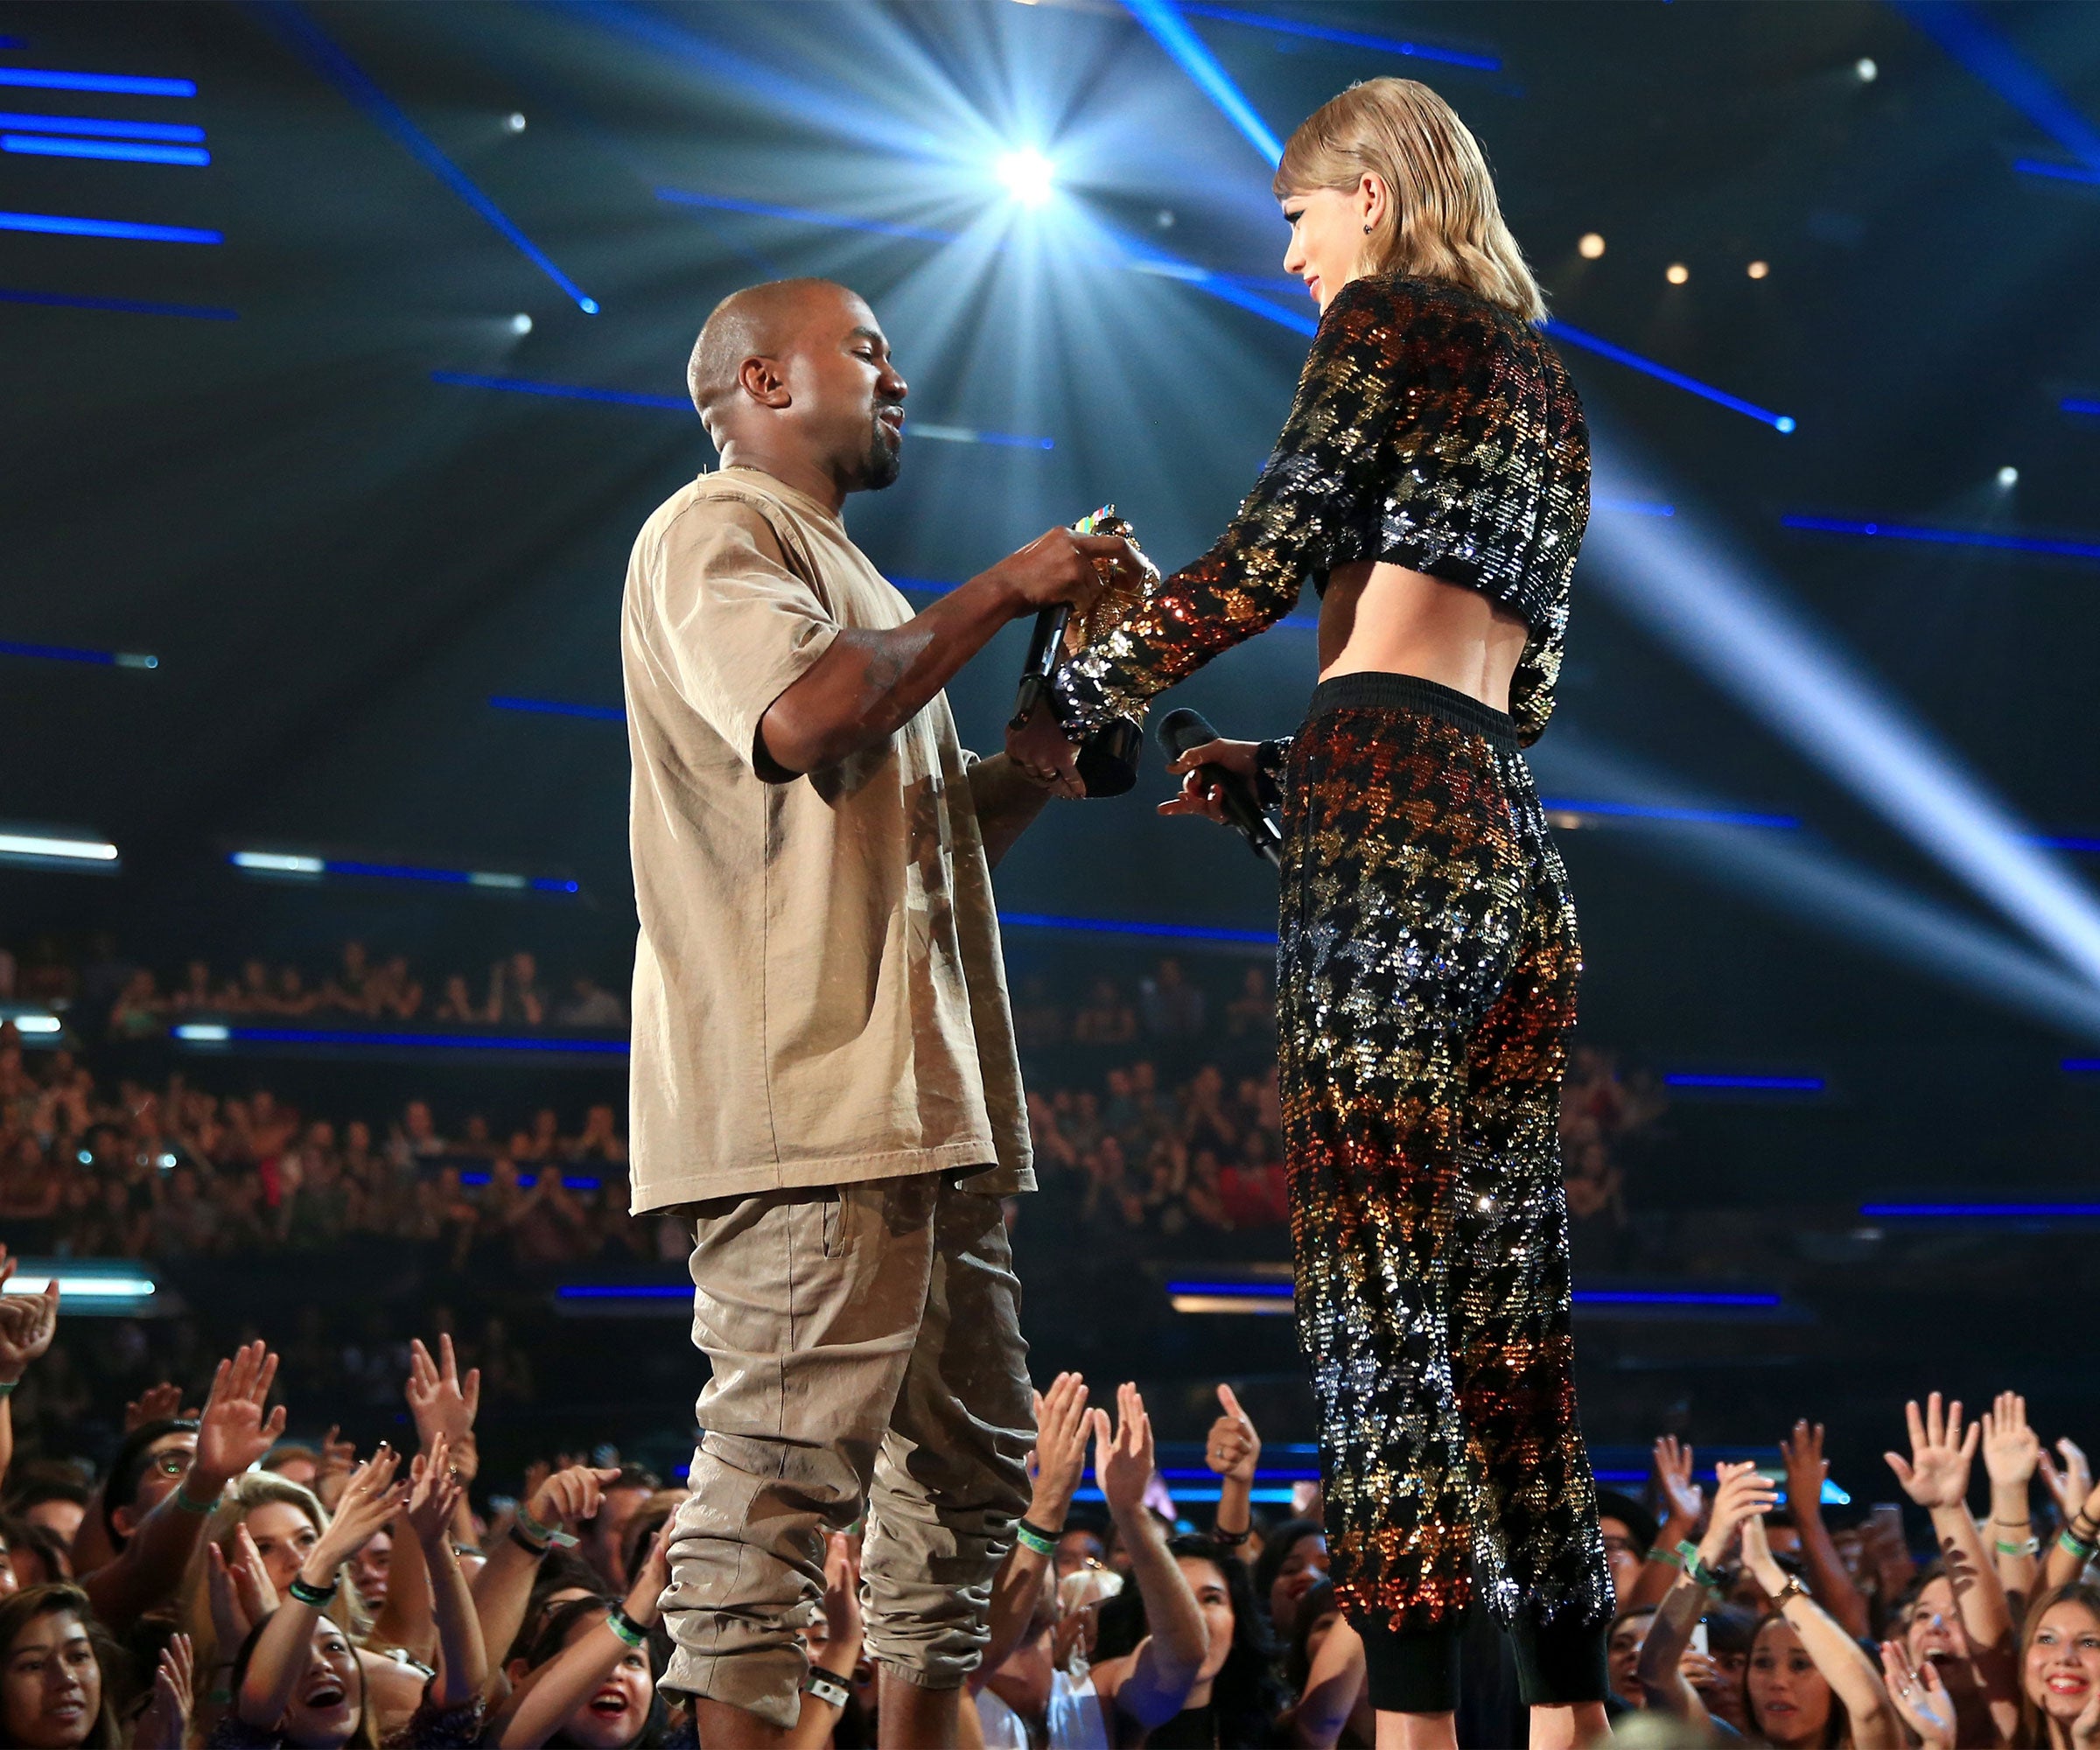 Taylor Swift Sex - Kanye West Taylor Swift VMA Feud & Whats Happened Since